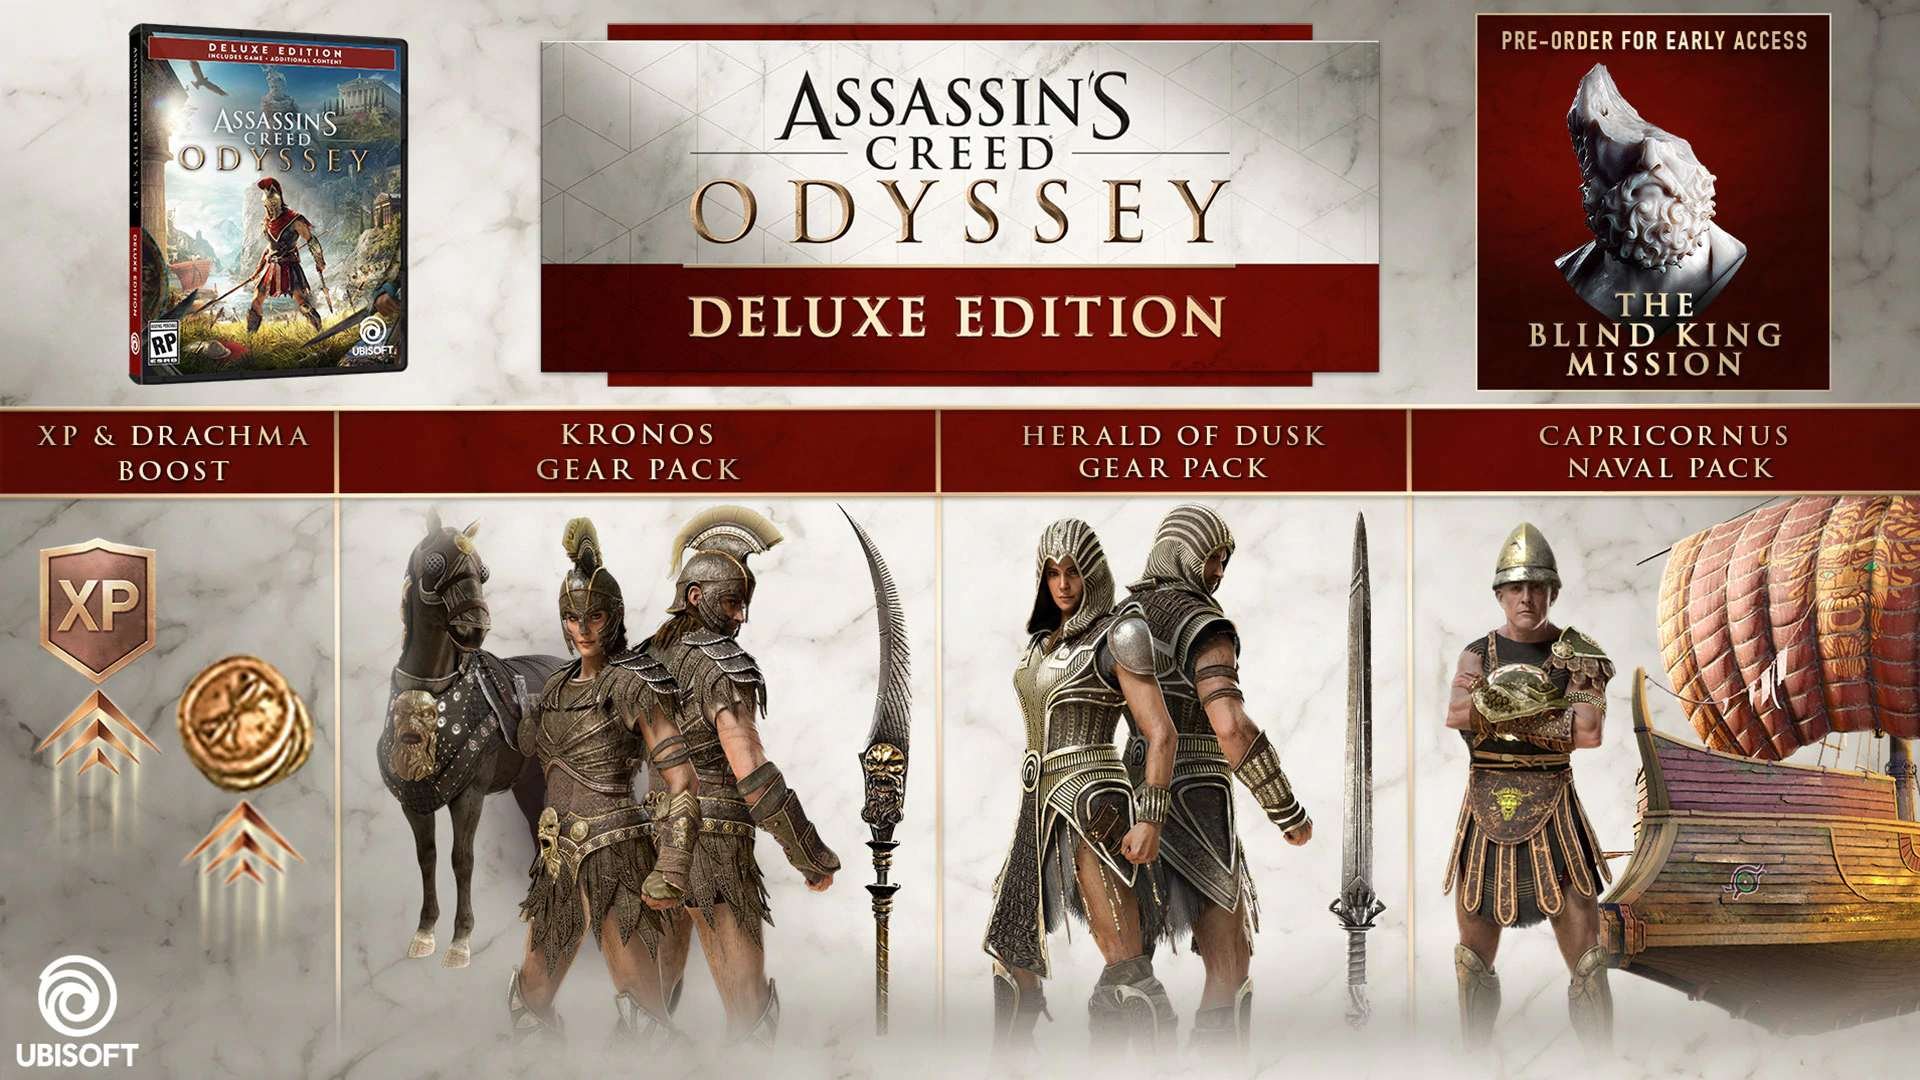 Assassin s creed odyssey editions. Assassin's Creed Odyssey Deluxe Edition. Deluxe Edition. Assassin's Creed: Odyssey - Ultimate Edition.